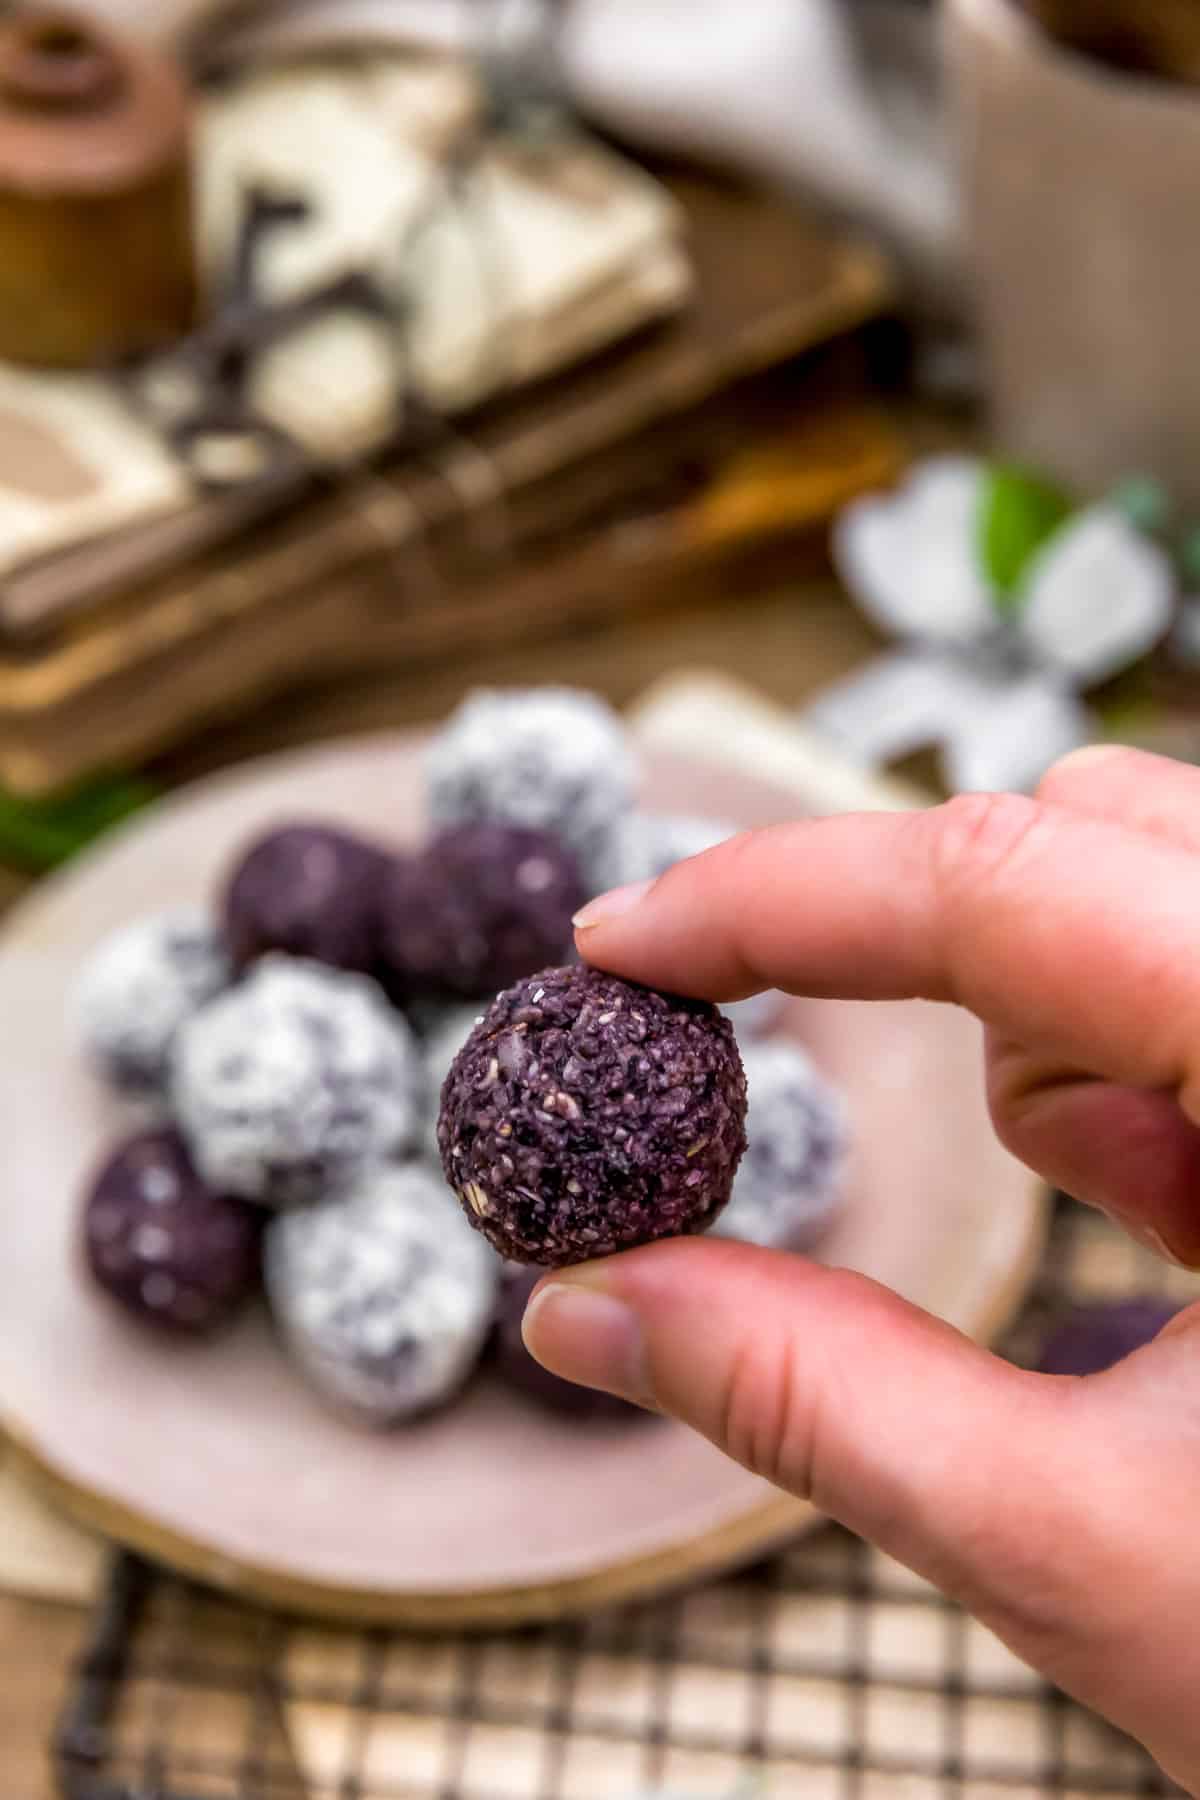 Holding a No Bake Blueberry Bliss Ball